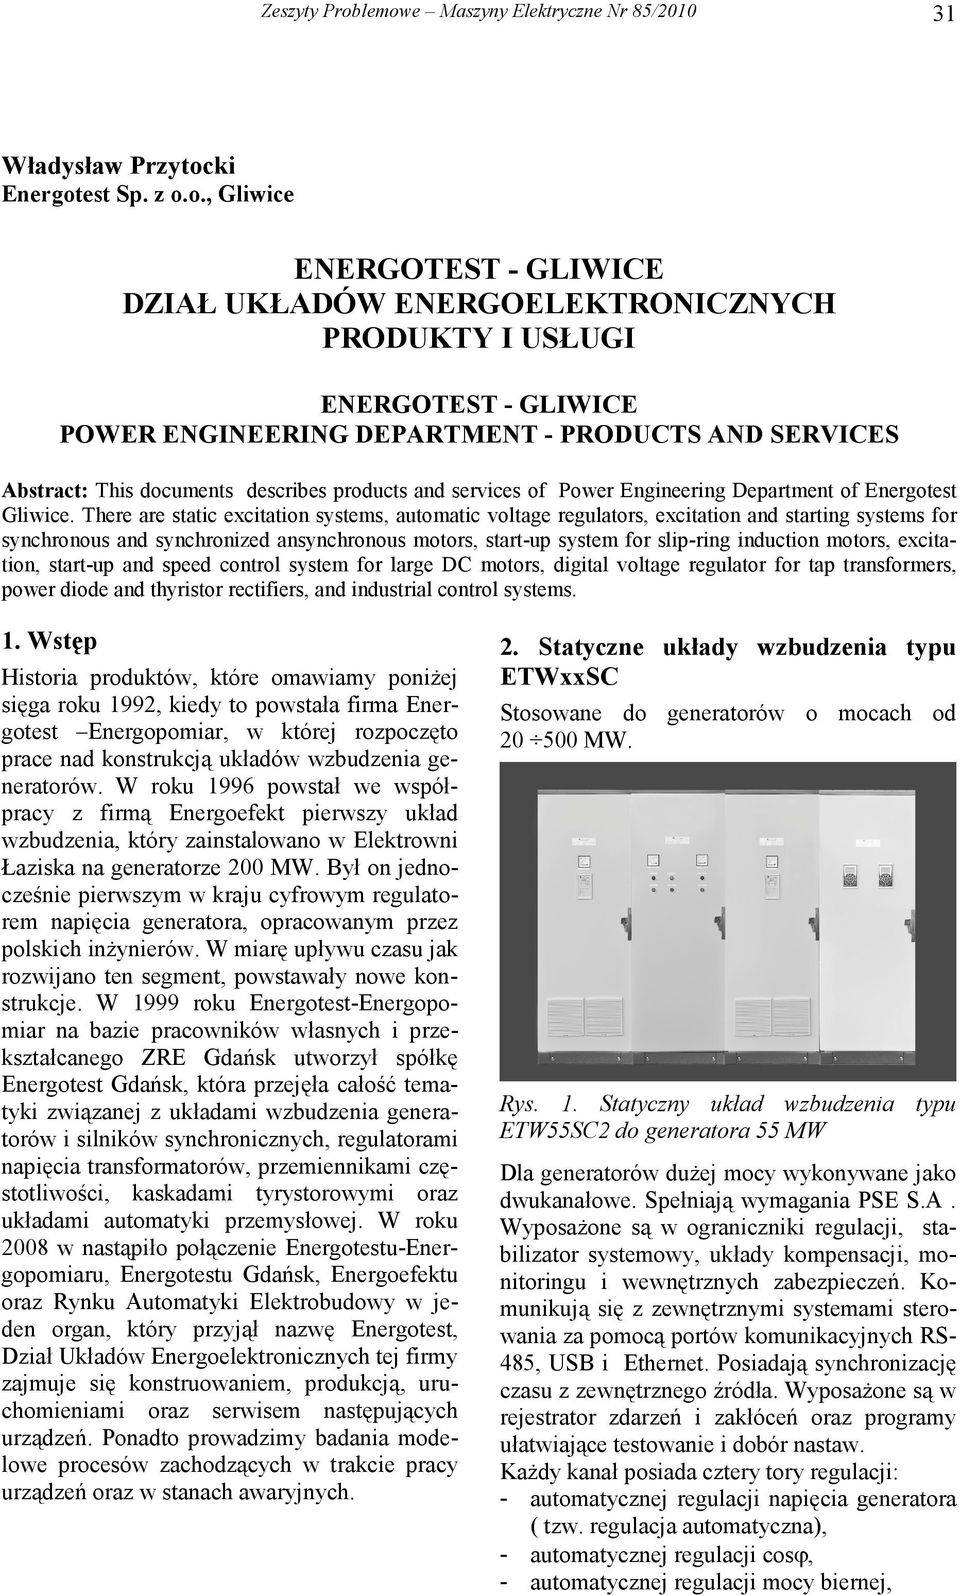 ENGINEERING DEPARTMENT PRODUCTS AND SERVICES Abstract: This documents describes products and services of Power Engineering Department of Energotest Gliwice.